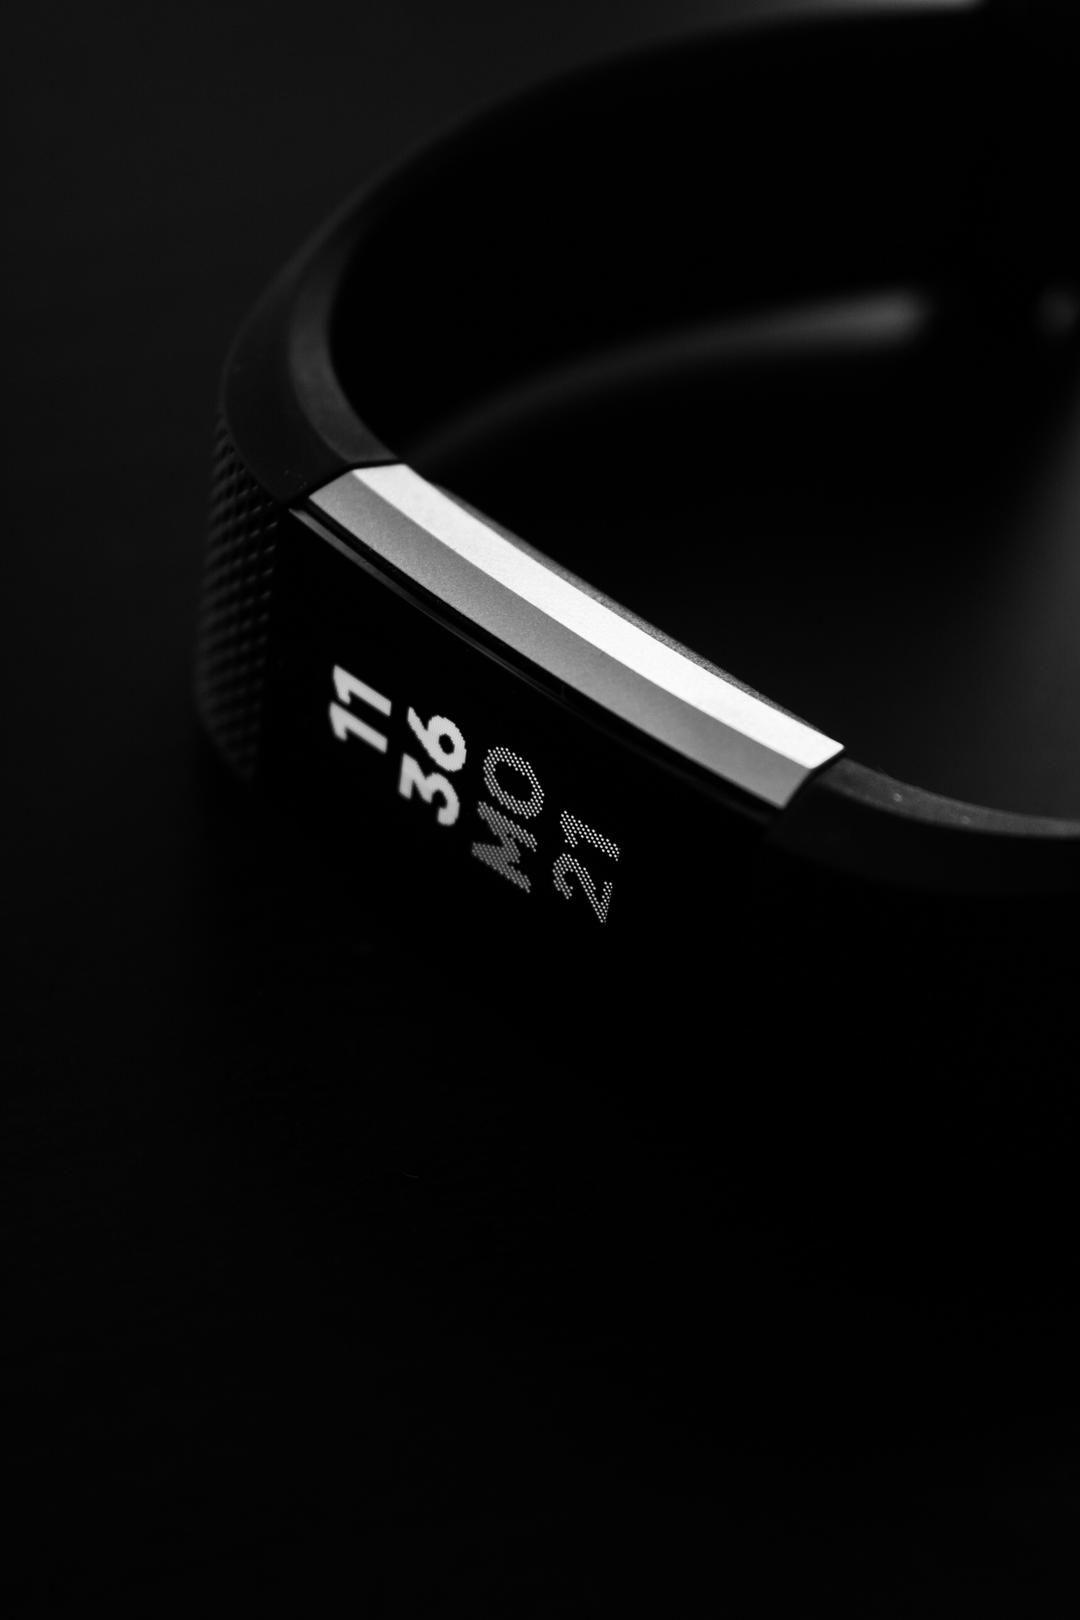 The Fitbit Charge 4 is a versatile fitness tracker with a built-in GPS and heart rate monitor. It tracks your daily steps, calories burned, and sleep patterns, and provides personalized insights to help you reach your fitness goals. The Charge 4 also has a long battery life and is water-resistant.